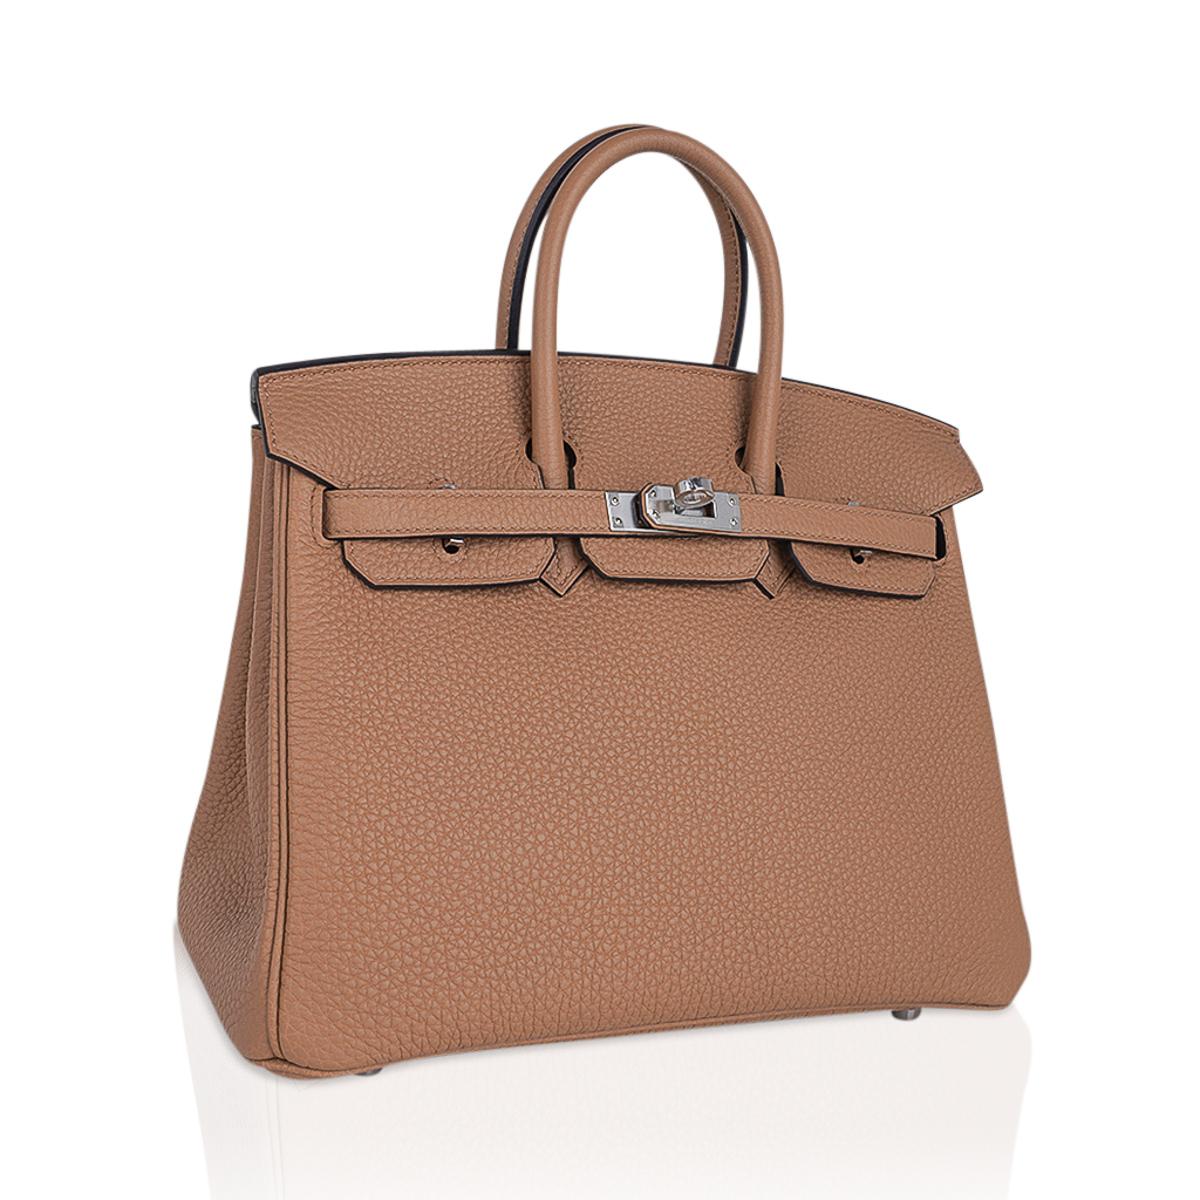 Mightychic offers an Hermes Birkin 25 bag featured in warm Chai.
This neutral Hermes Birkin is the all time perfect neutral statement.
Softer and creamier than Gold, this fabulous colour moves easily with any piece in your wardrobe.
Lush Togo